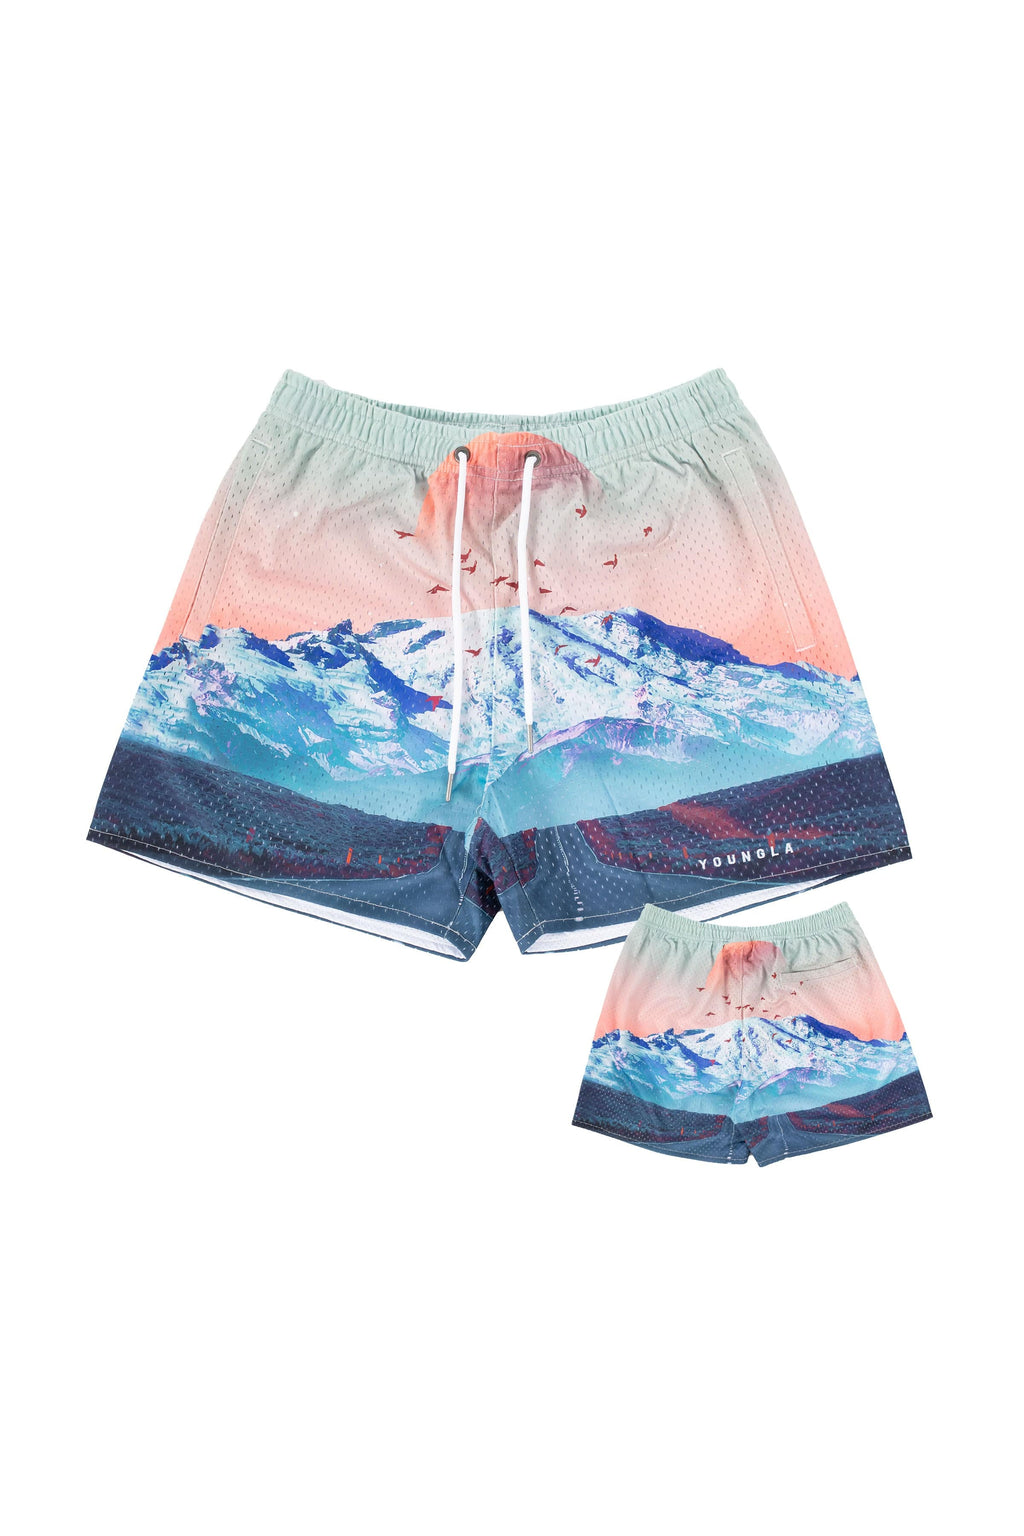 150 After Party Shorts – YoungLA